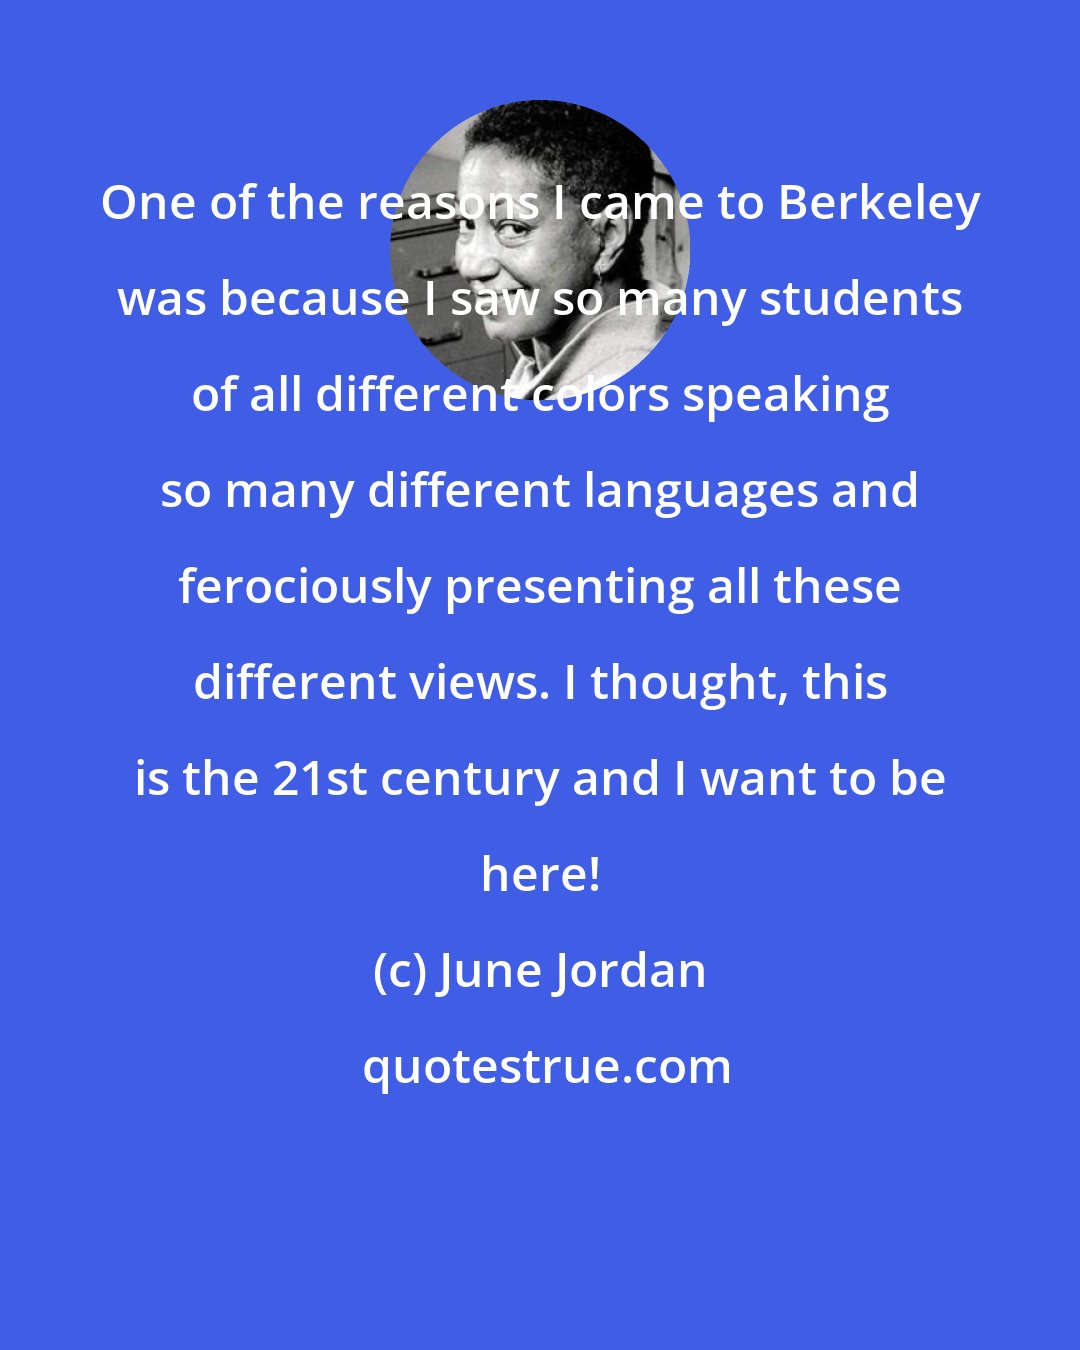 June Jordan: One of the reasons I came to Berkeley was because I saw so many students of all different colors speaking so many different languages and ferociously presenting all these different views. I thought, this is the 21st century and I want to be here!